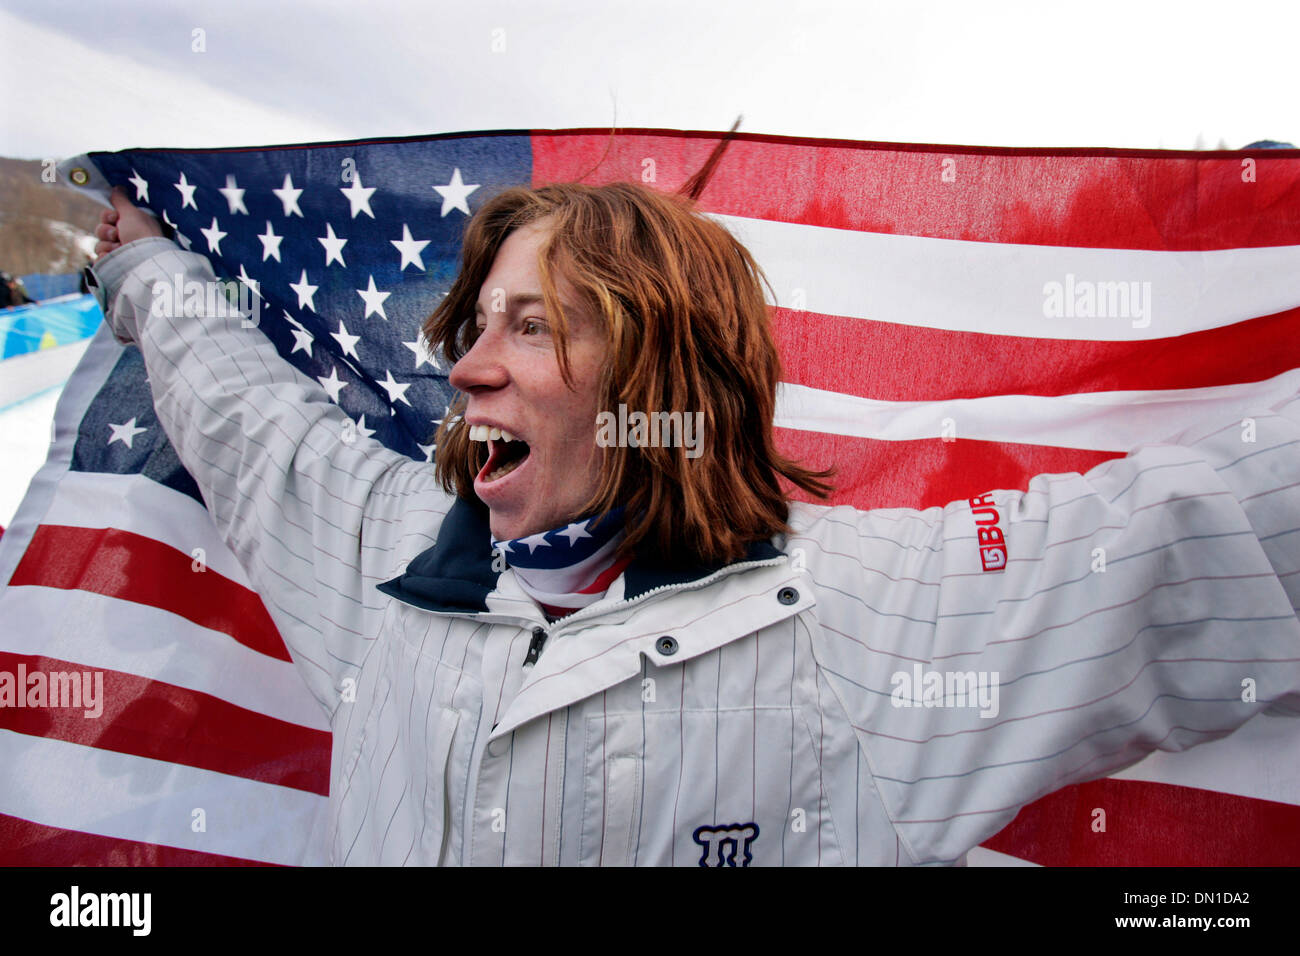 Feb 12, 2006; Bardonecchia, ITALY; XX Winter Olympics: SHAUN WHITE of the  US celebrates after winning a gold medal in the men's half pipe  snowboarding competition at the Torino 2006 Winter Olympic